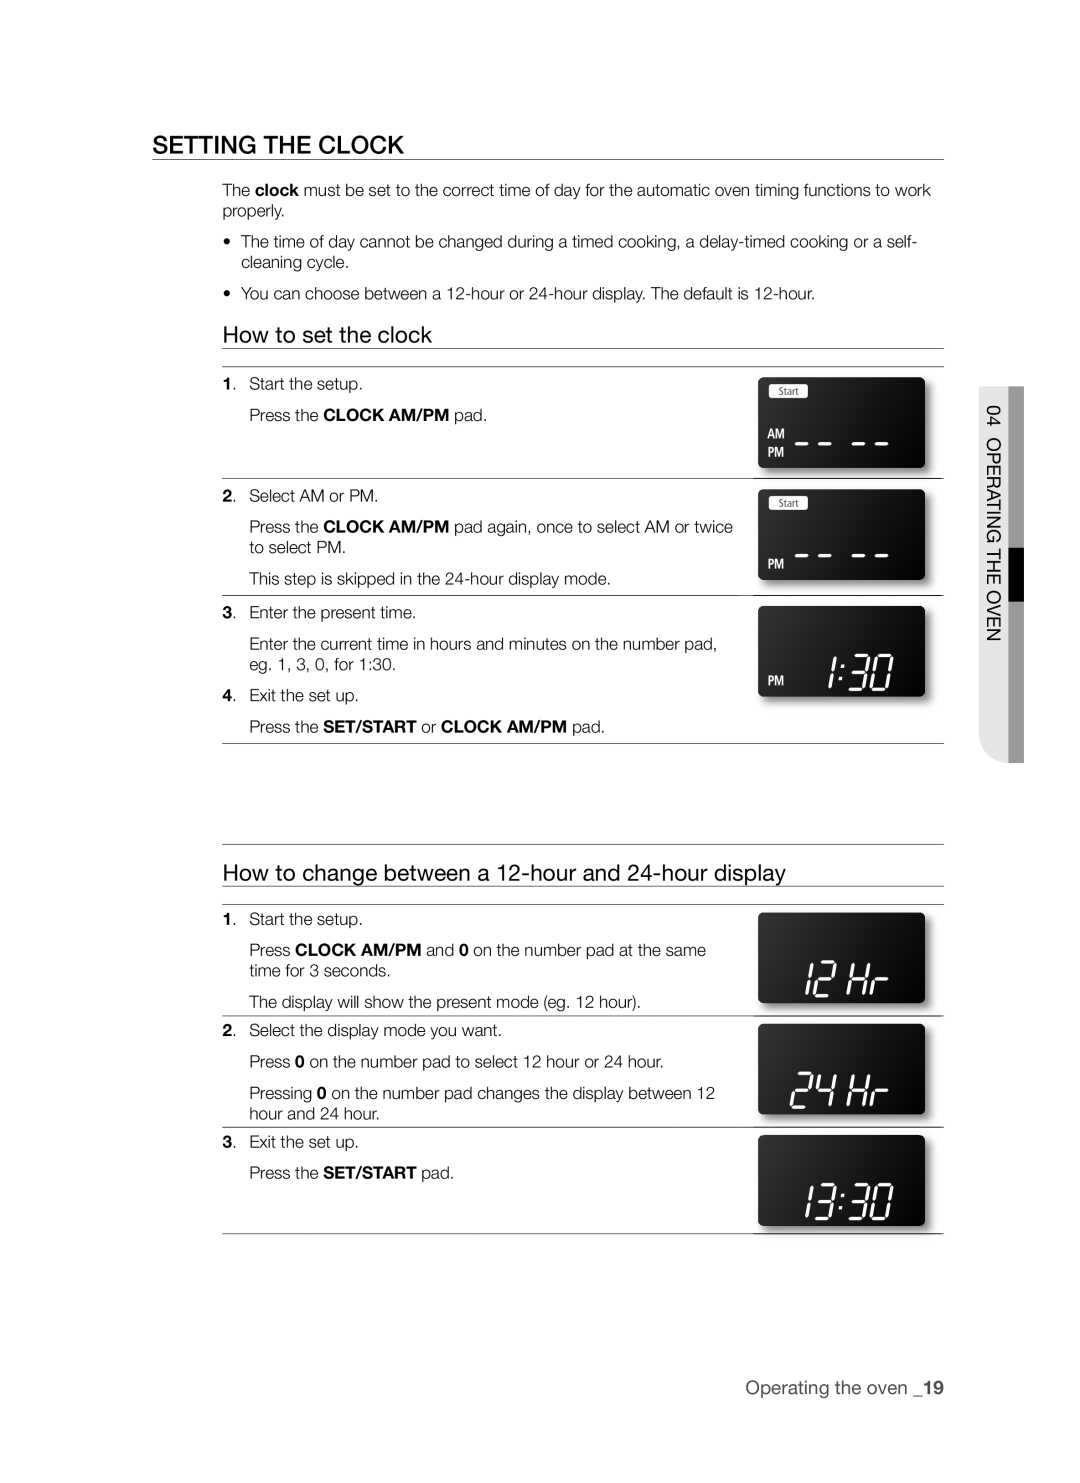 Samsung FTQ353 user manual Setting The Clock, How to set the clock, How to change between a 12-hour and 24-hour display 